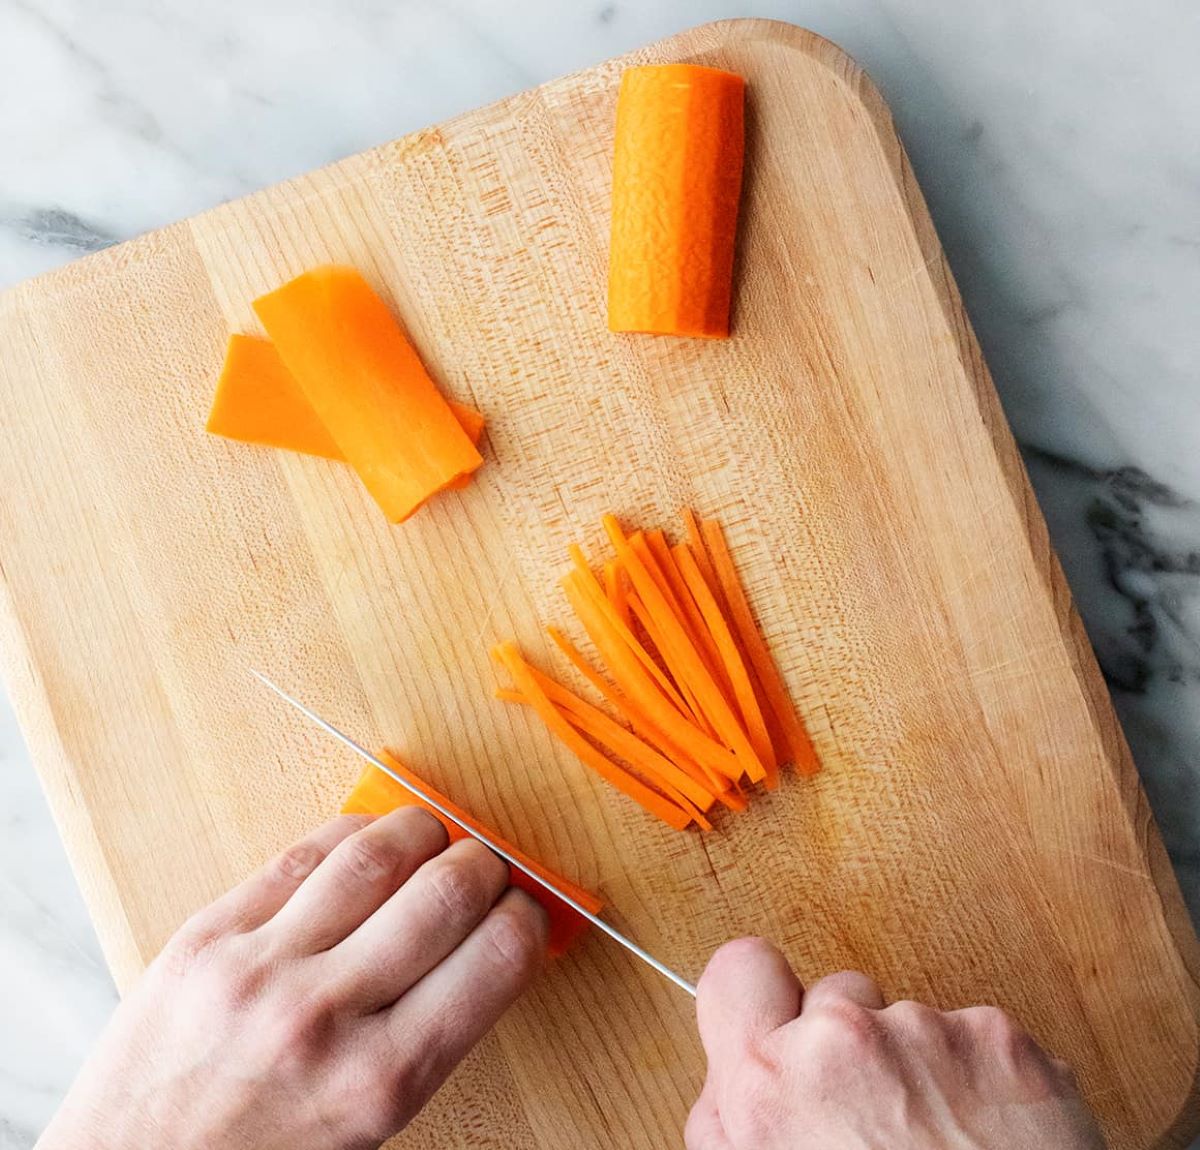 How To Cut Carrots (with Step-By-Step Photos)